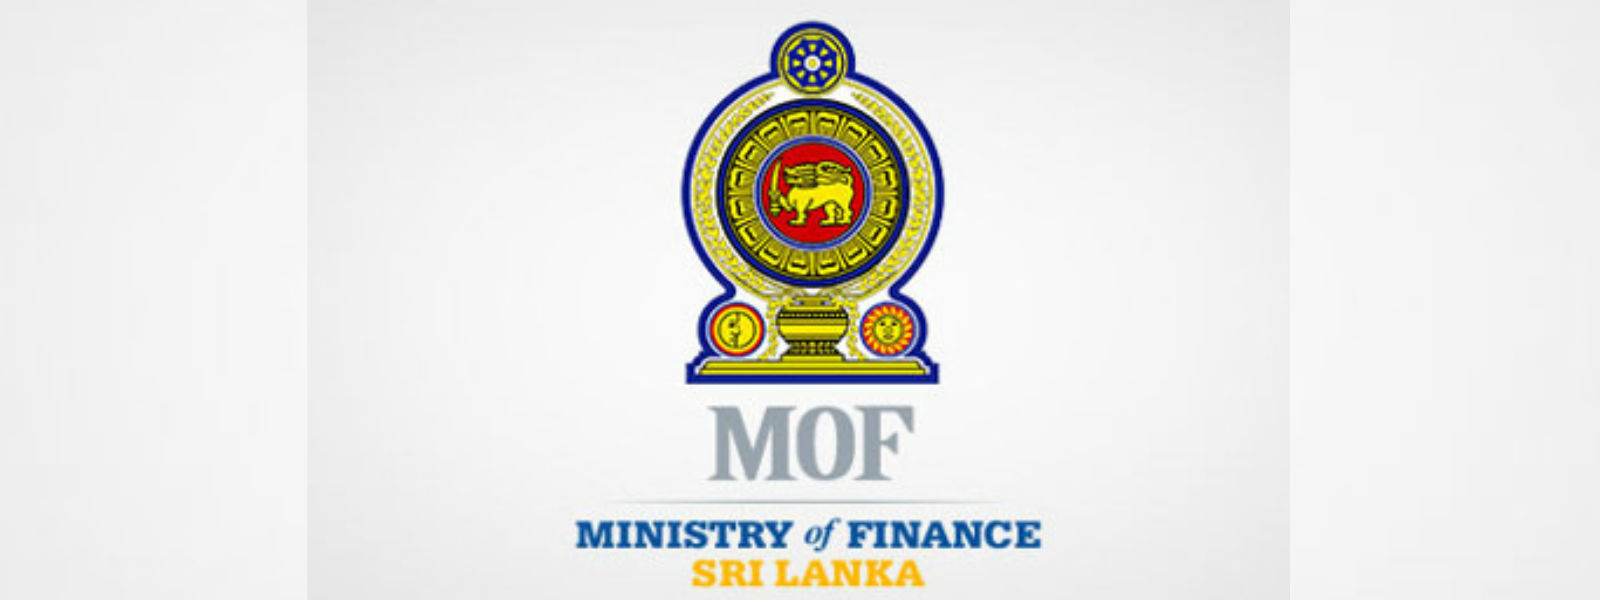 Moody’s downgrading unwarranted says Ministry of Finance